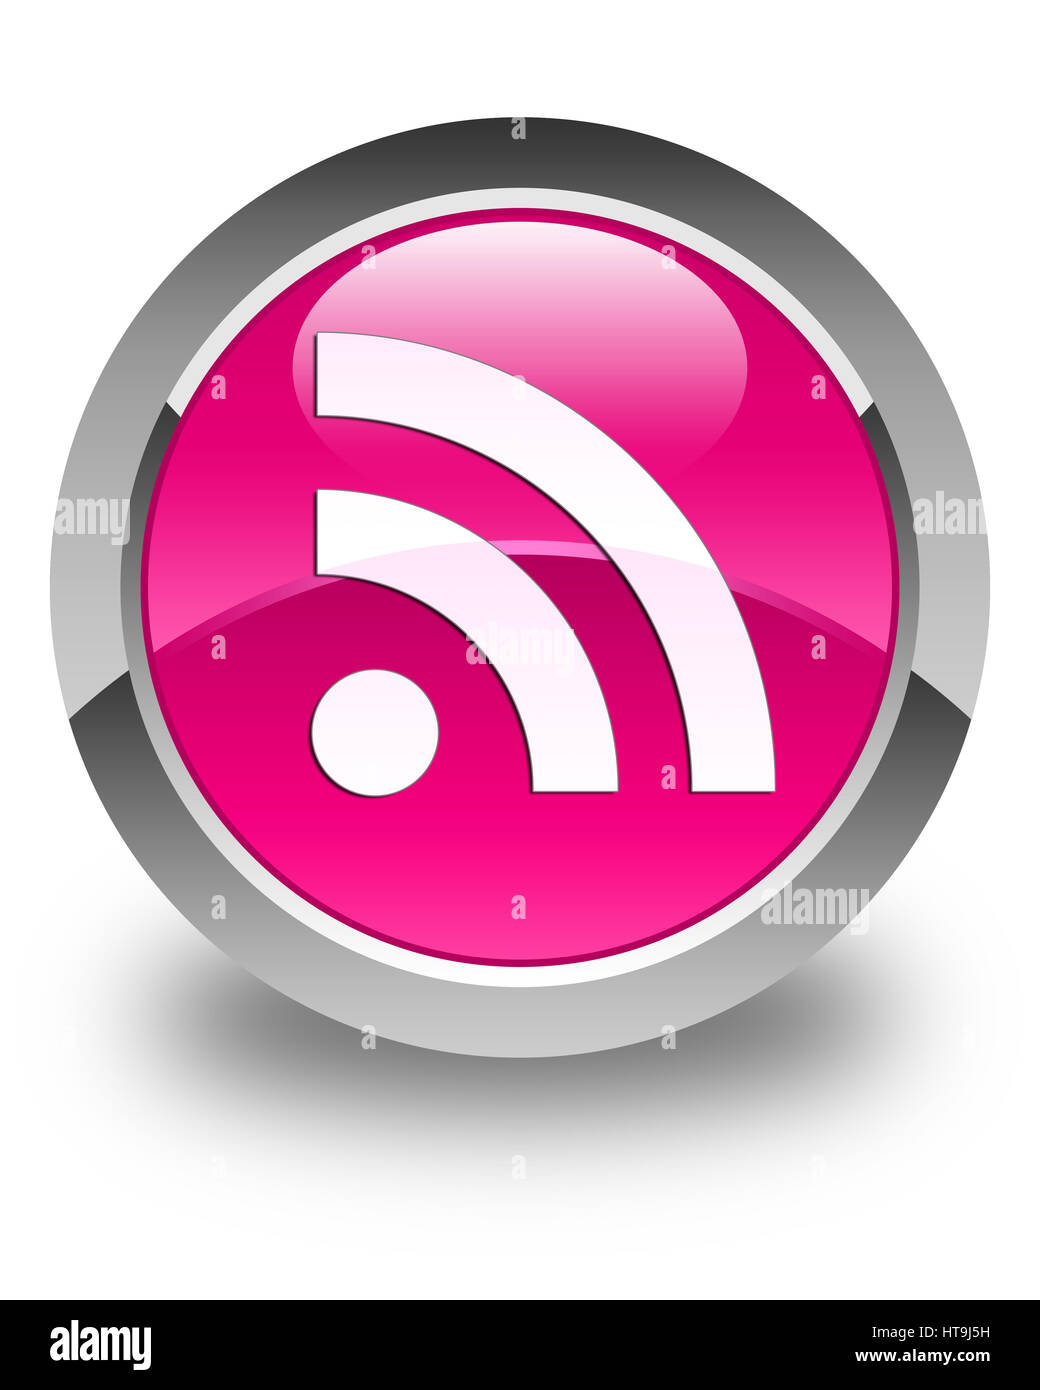 RSS icon isolated on glossy pink round button abstract illustration Stock Photo